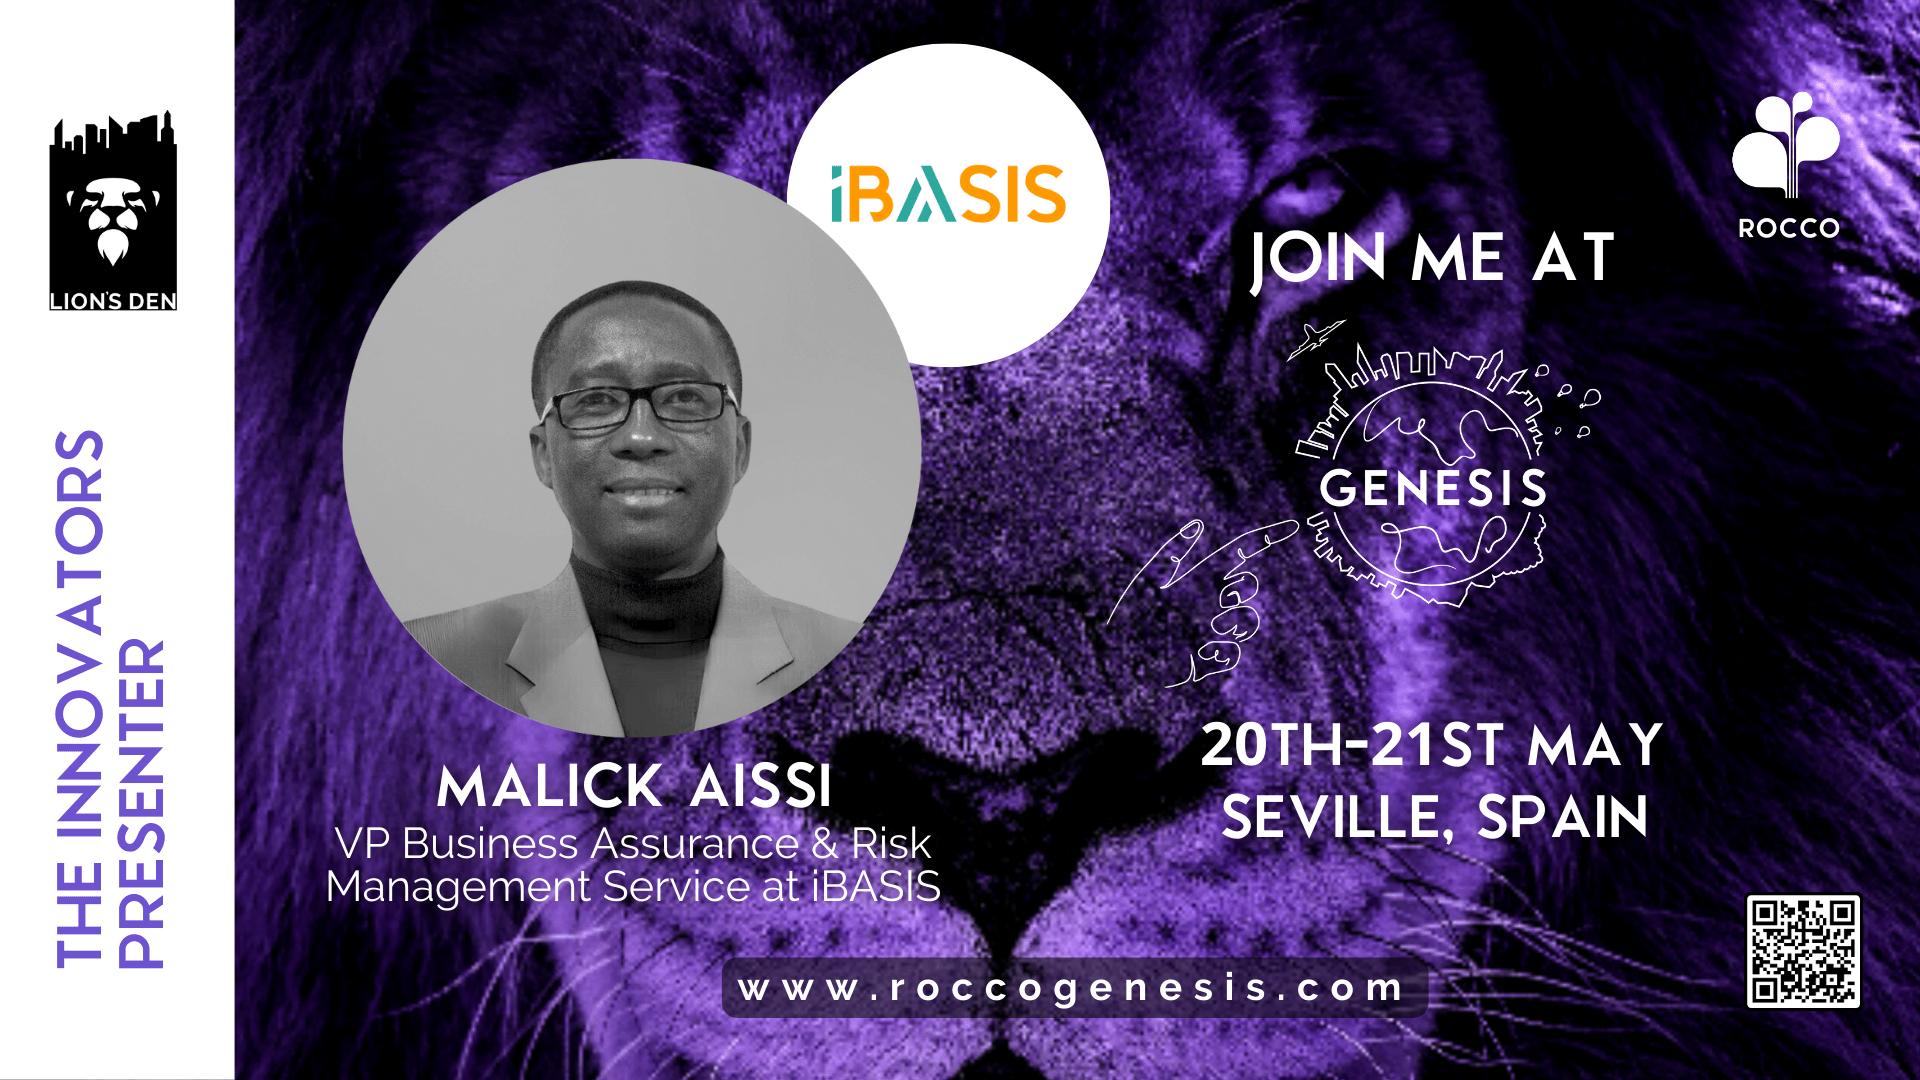 iBasis will face the Lions in Genesis